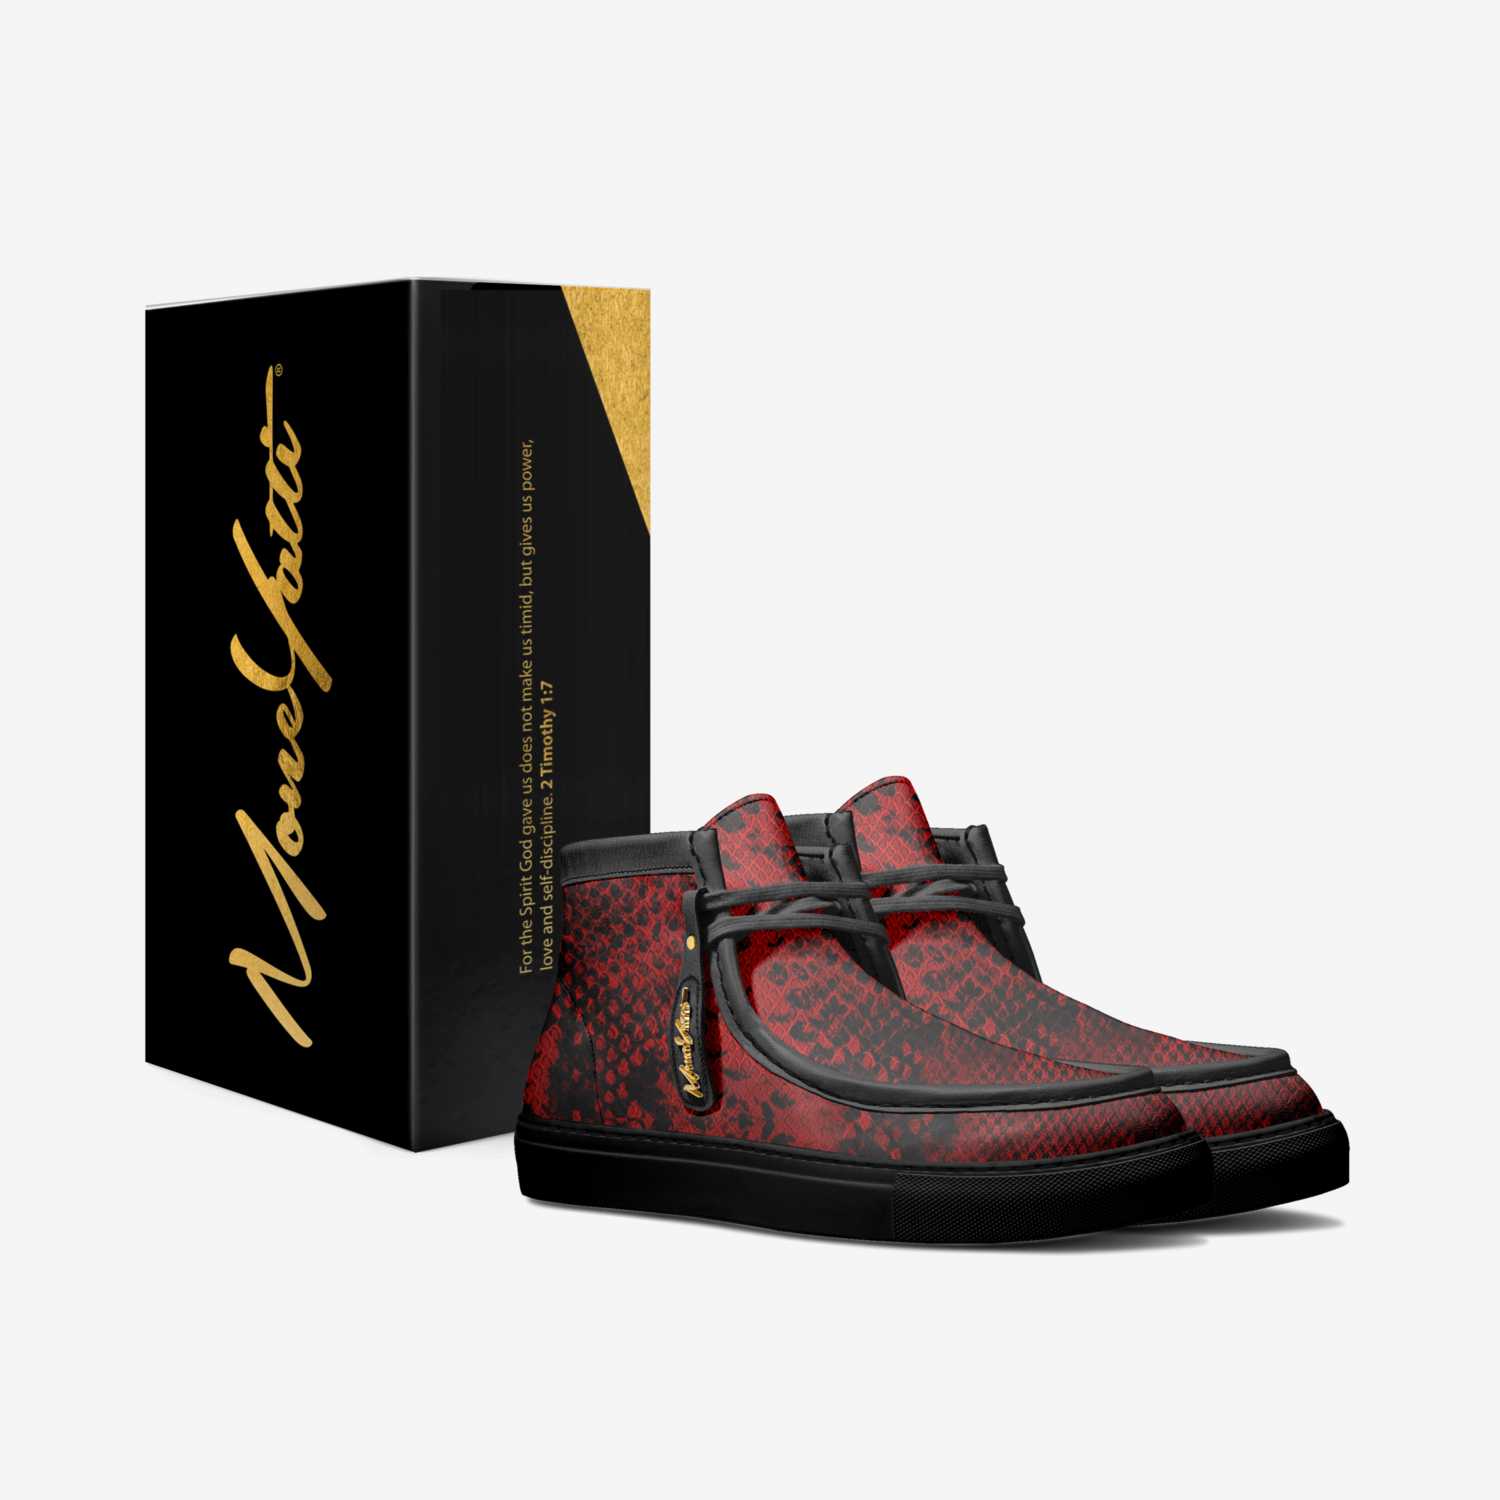 LUX 017 custom made in Italy shoes by Moneyatti Brand | Box view